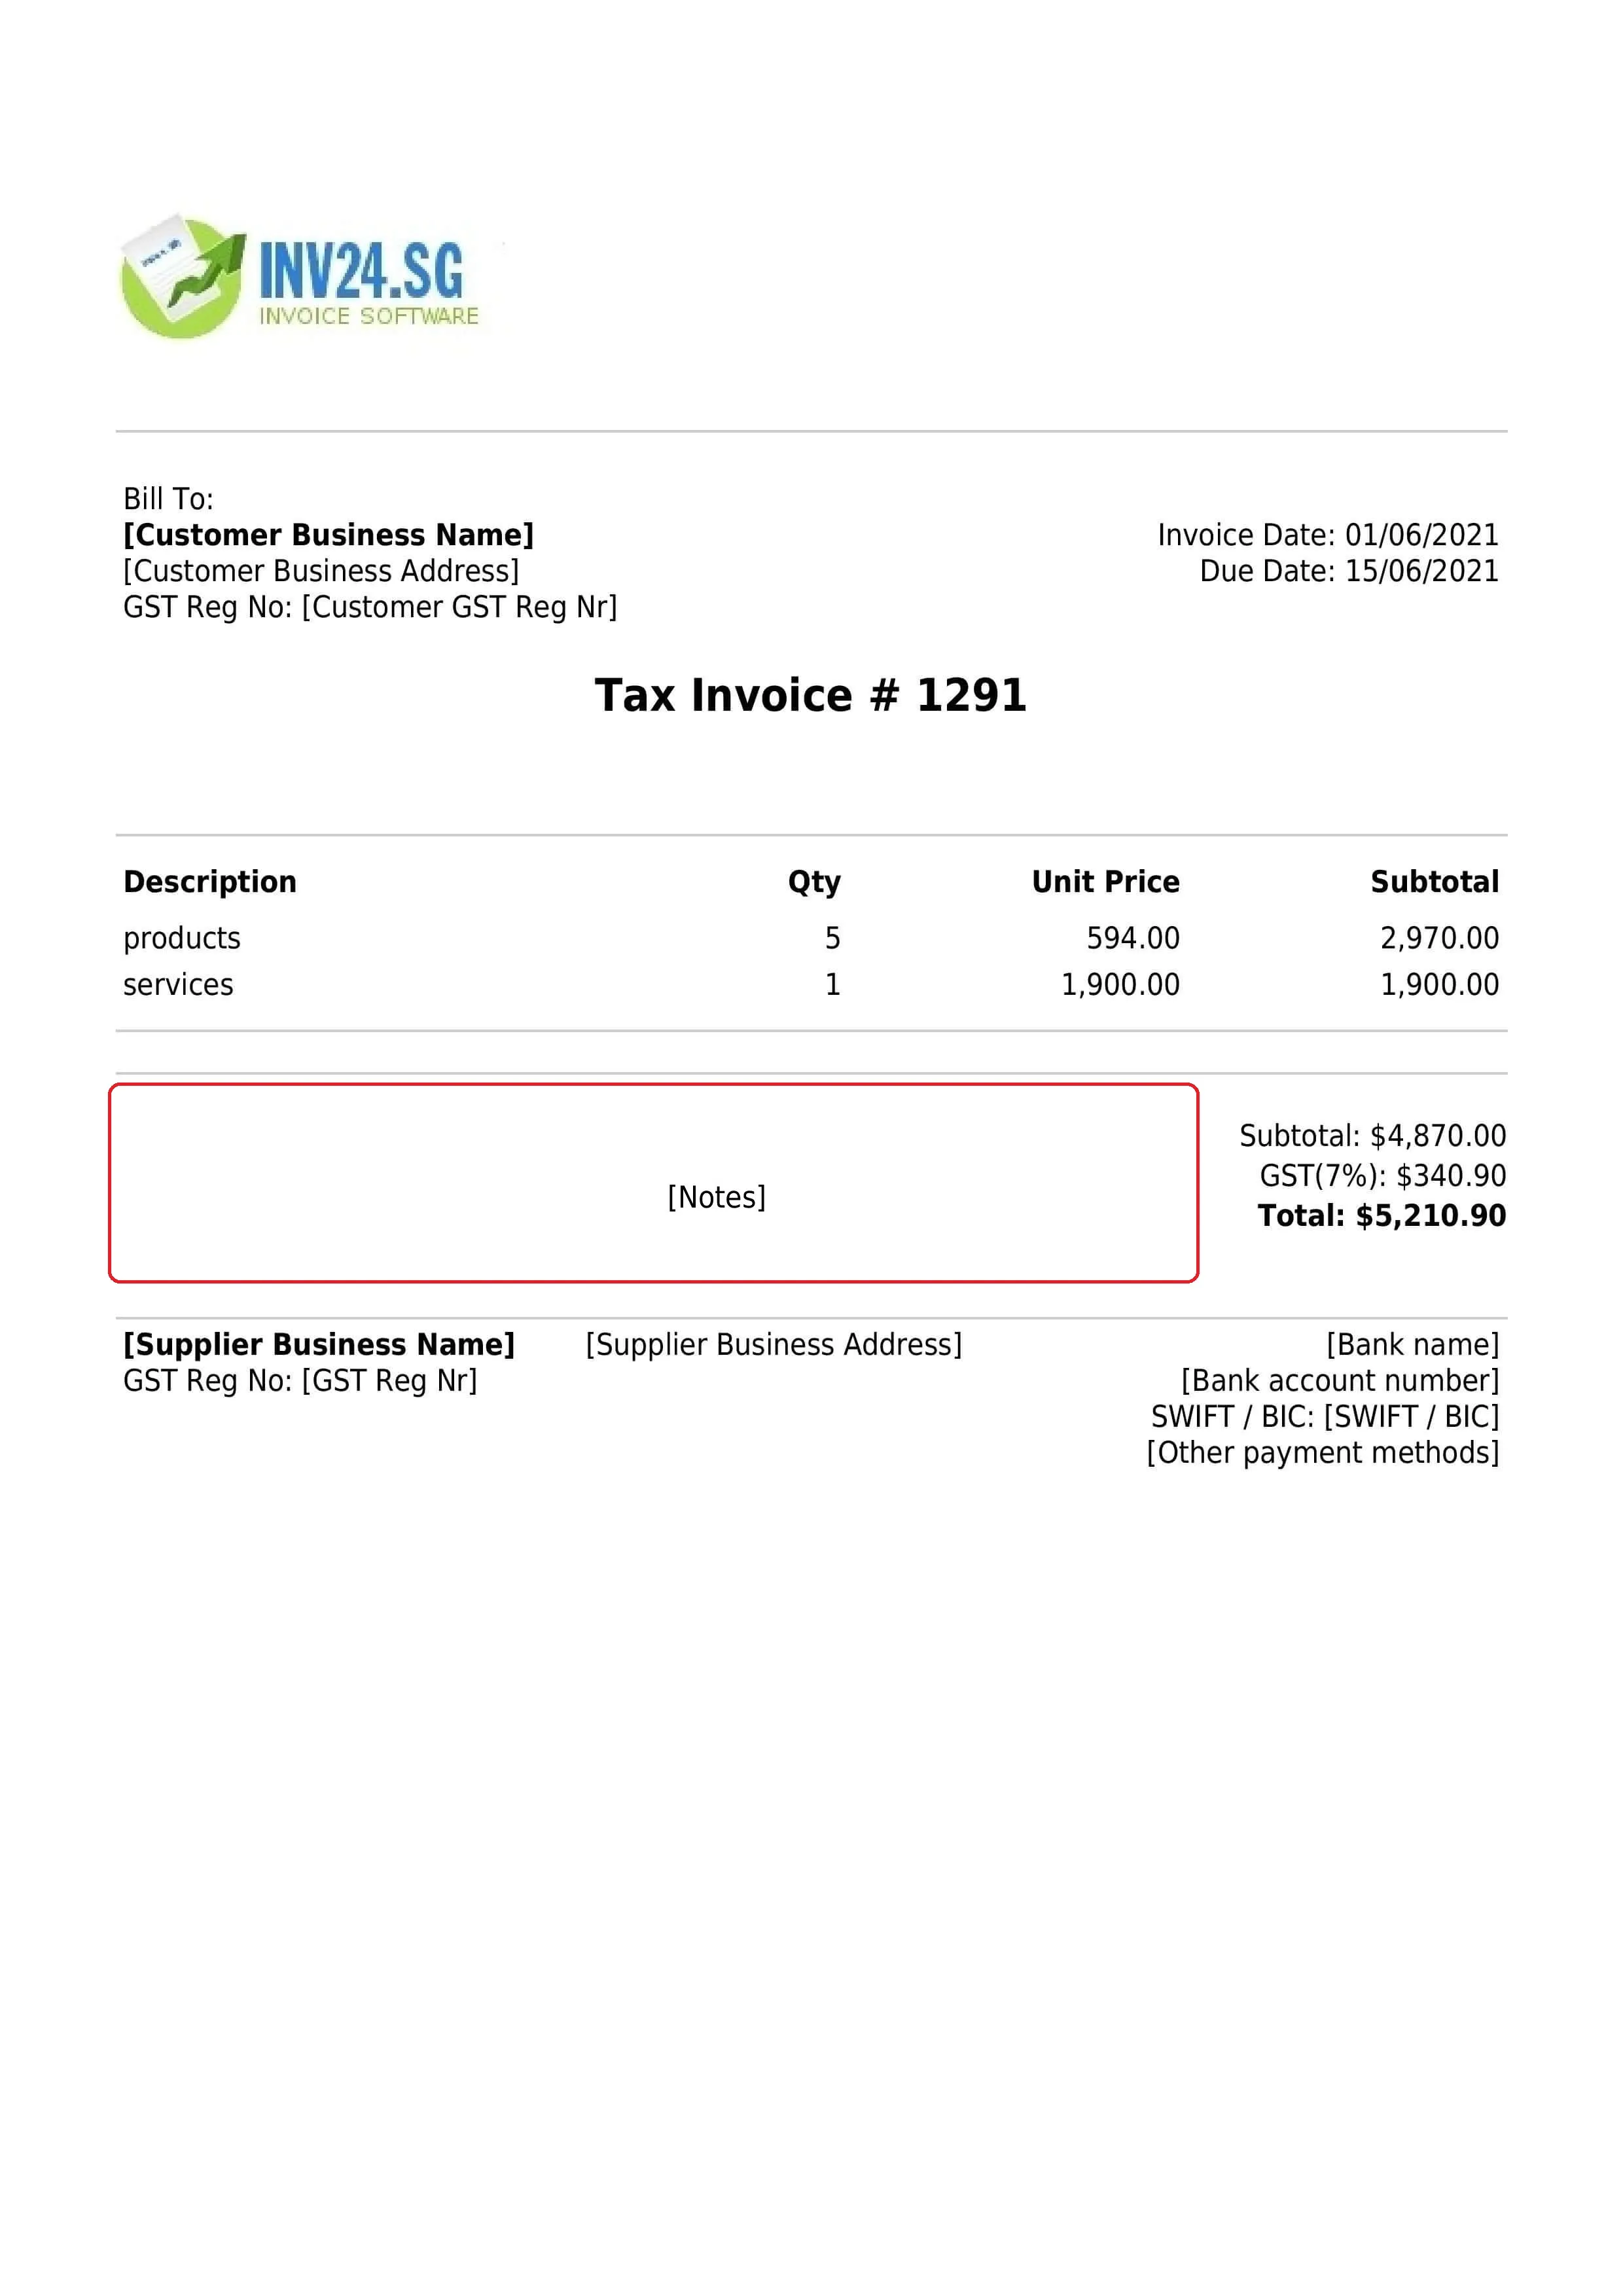 Invoice notes